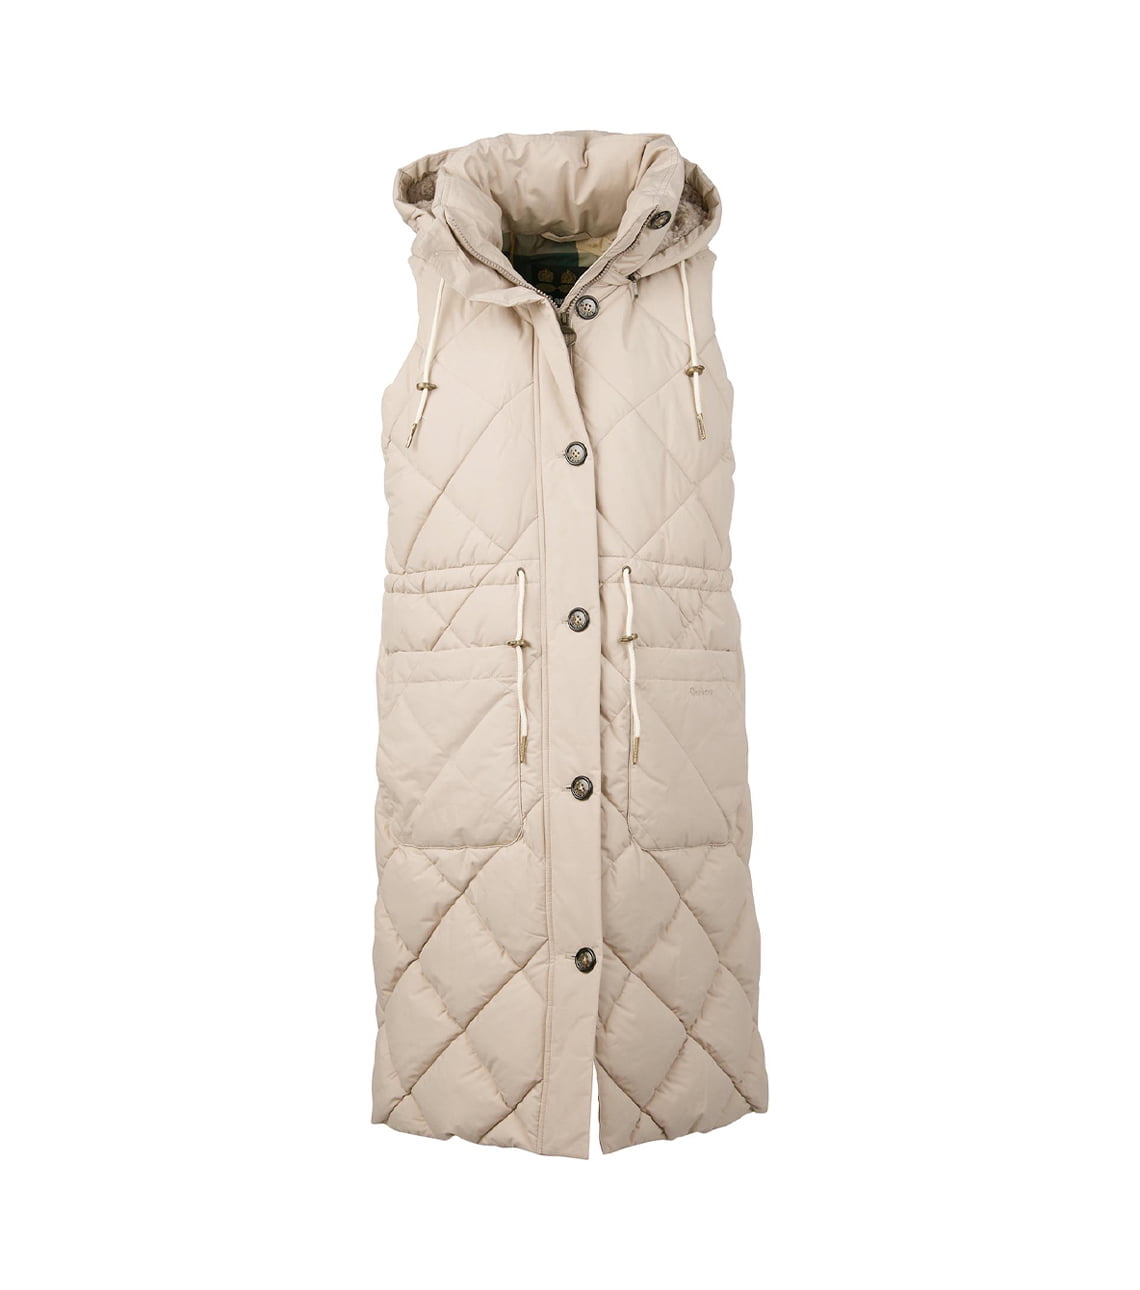 propeller camp Technology BARBOUR Orinsay gilet OAT - The Women's Society Boutique